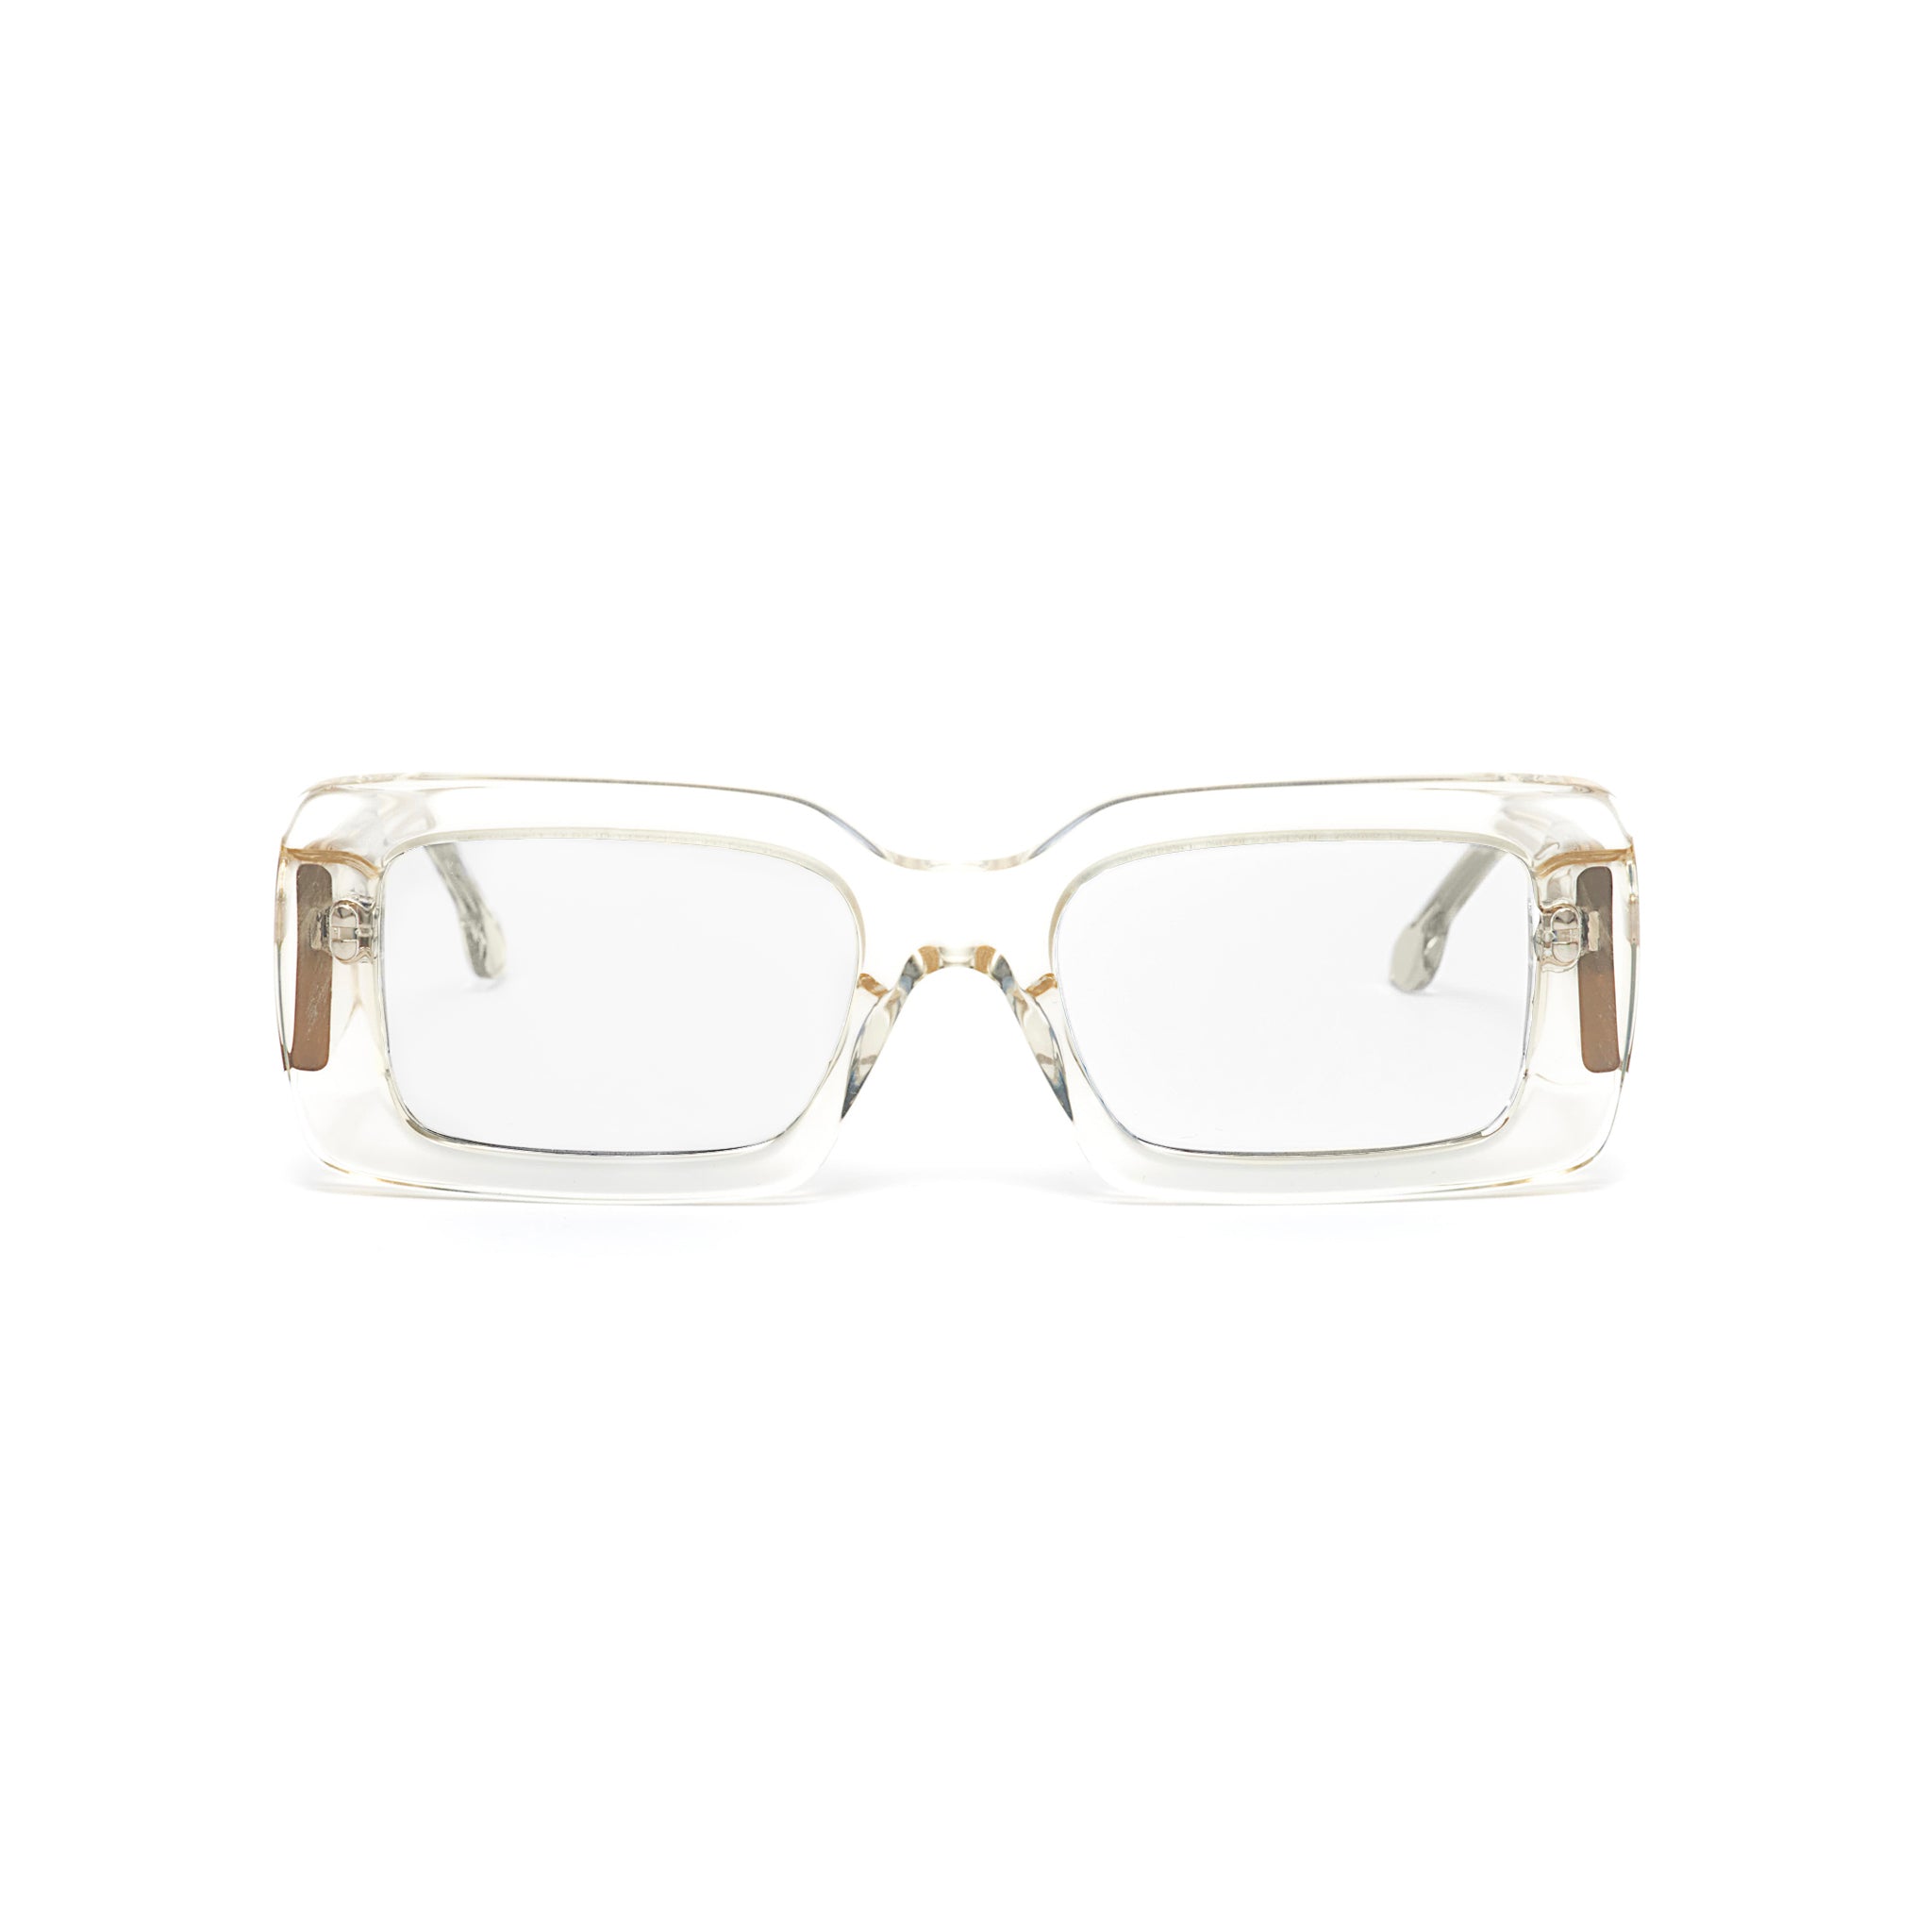 Ameos eyewear noelle optical glasses in transparent frames. Unisex and handmade in Italy.